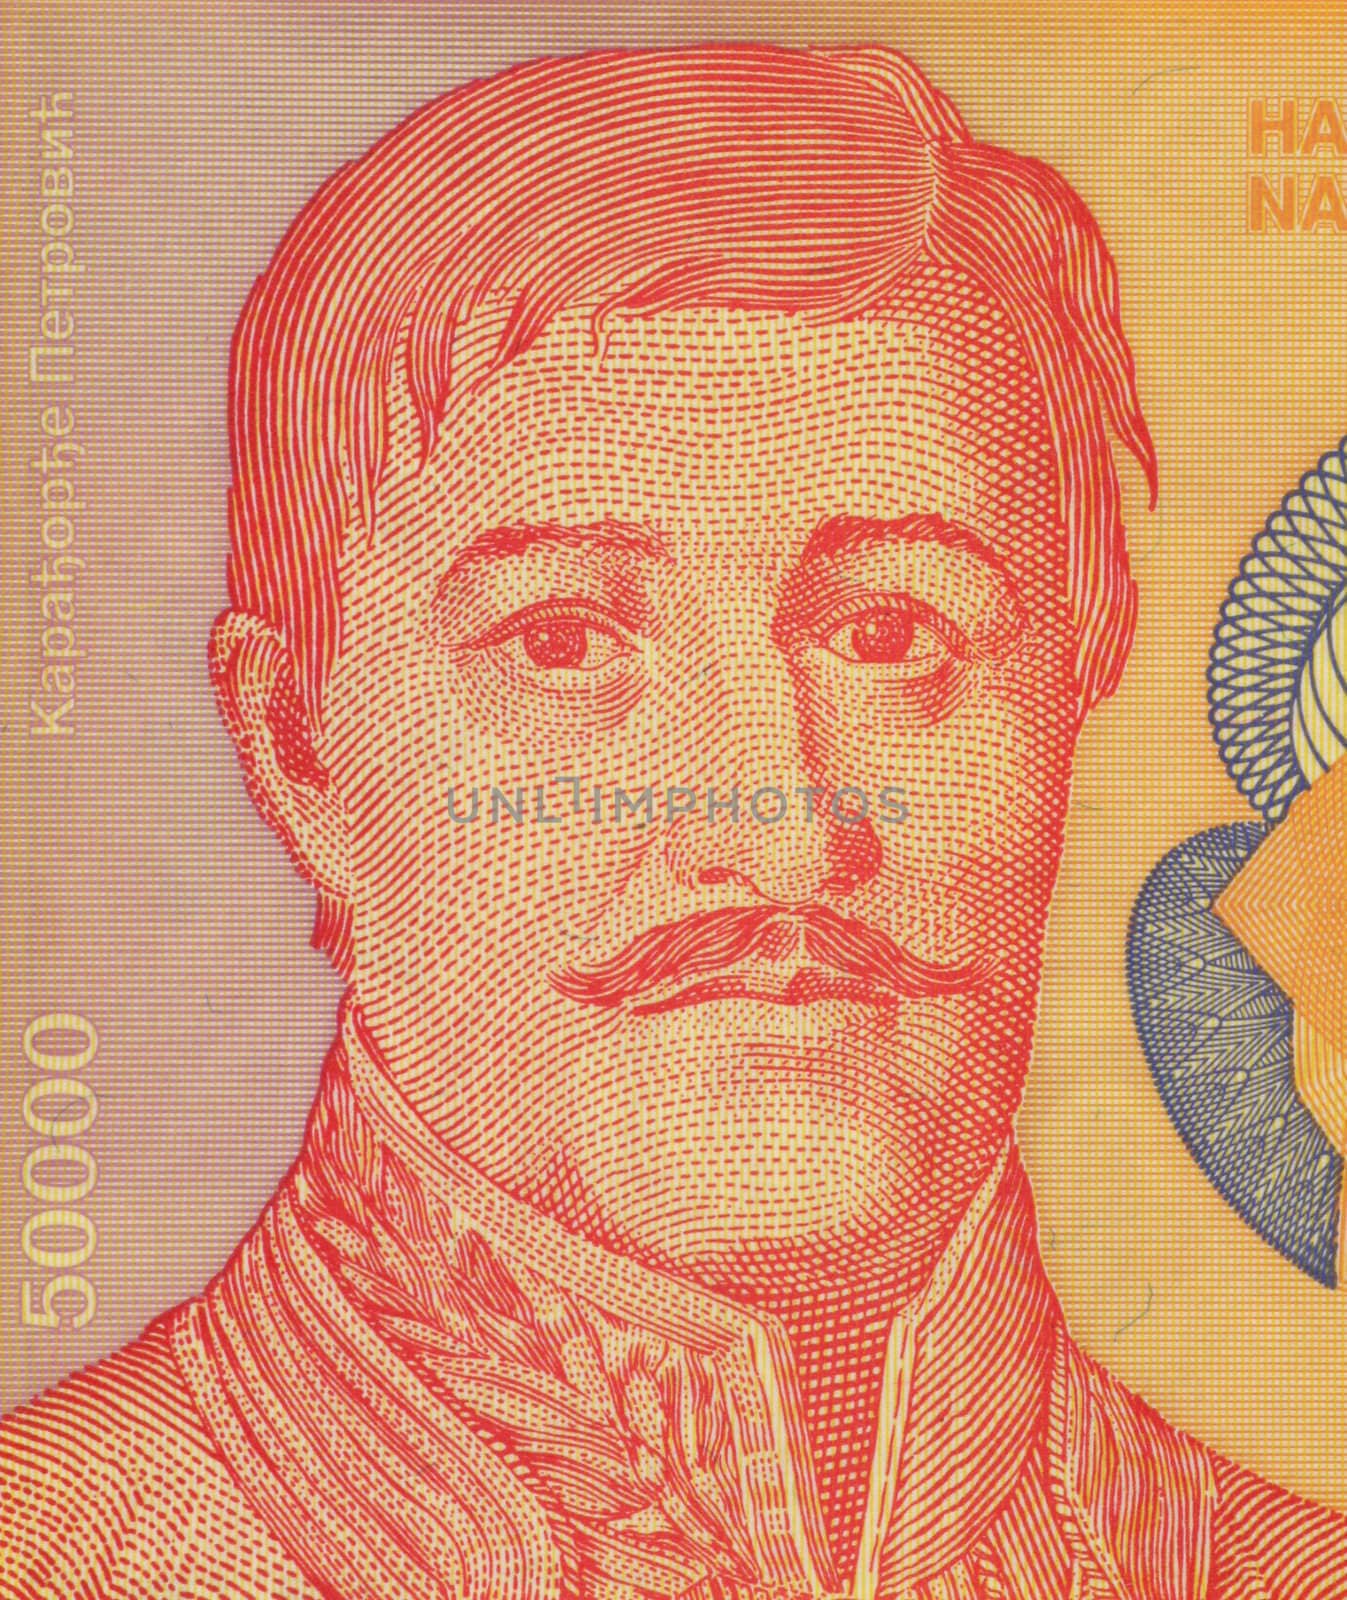 Karageorge Petrovitch on 50000 Dinara 1994 Banknote from Yugoslavia. Leader of the first Serbian uprising against the Ottoman empire.